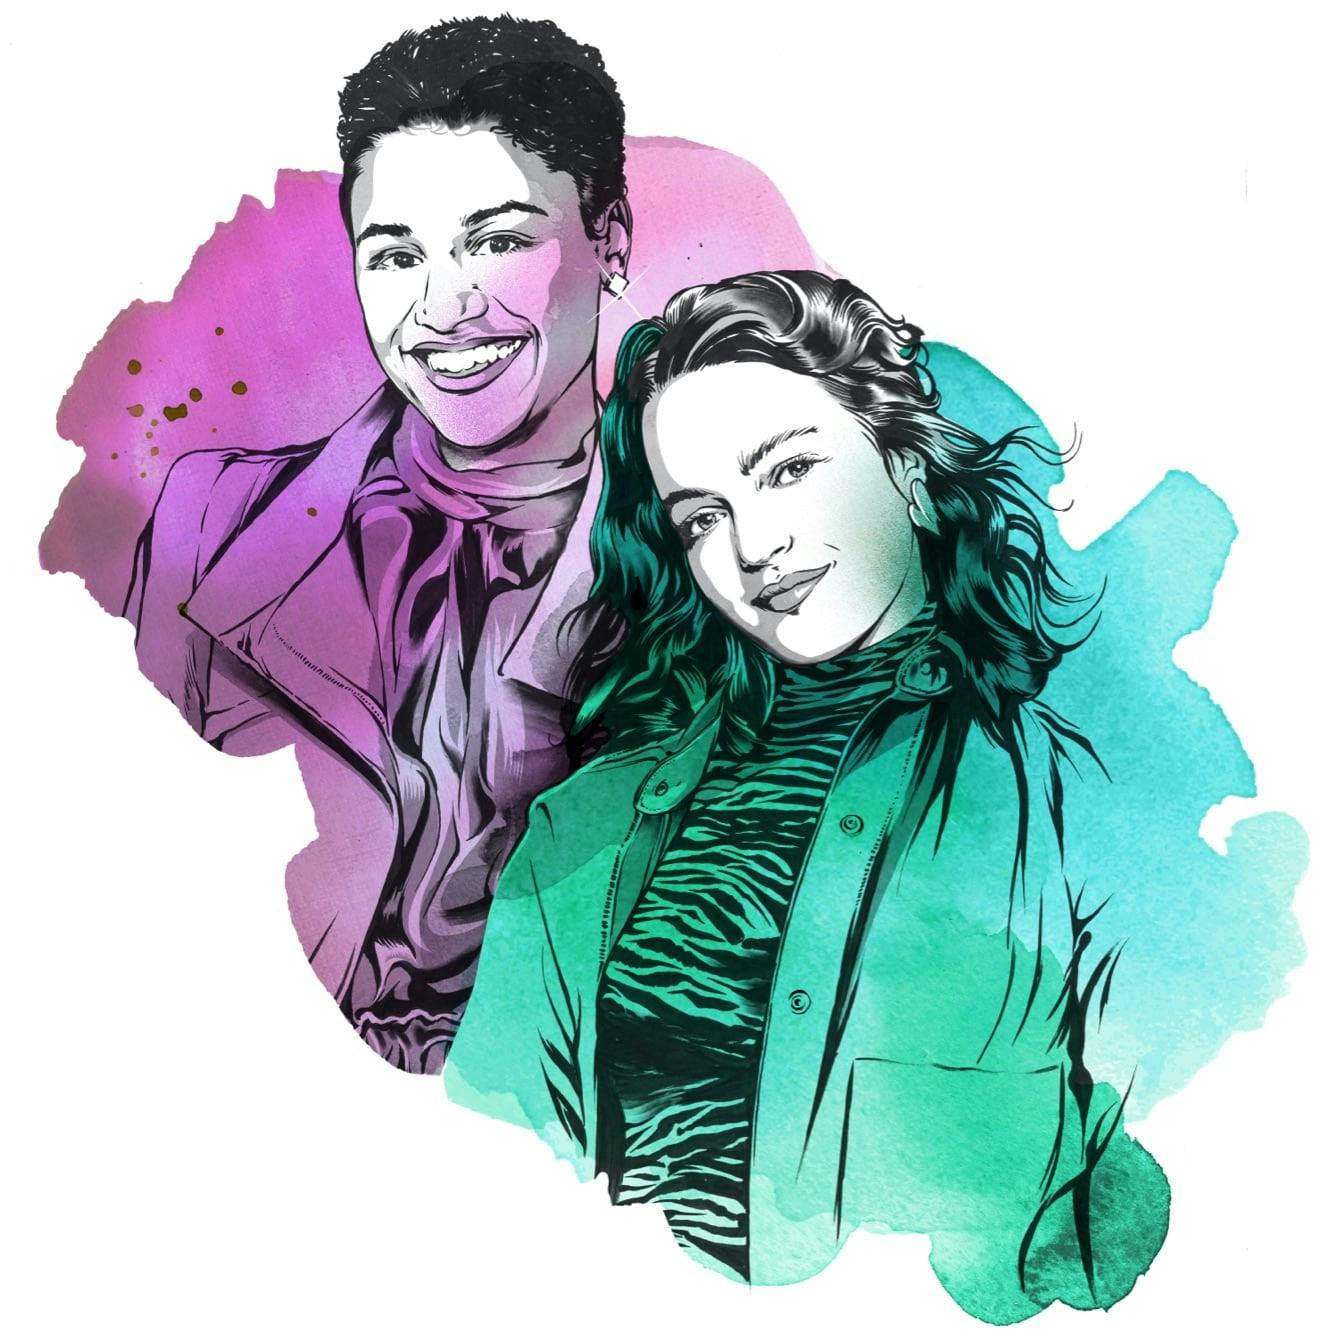 Illustration of actors Ariana DeBose and Jo Ellen Pellman, made with watercolors of purple and green over pencil sketches.